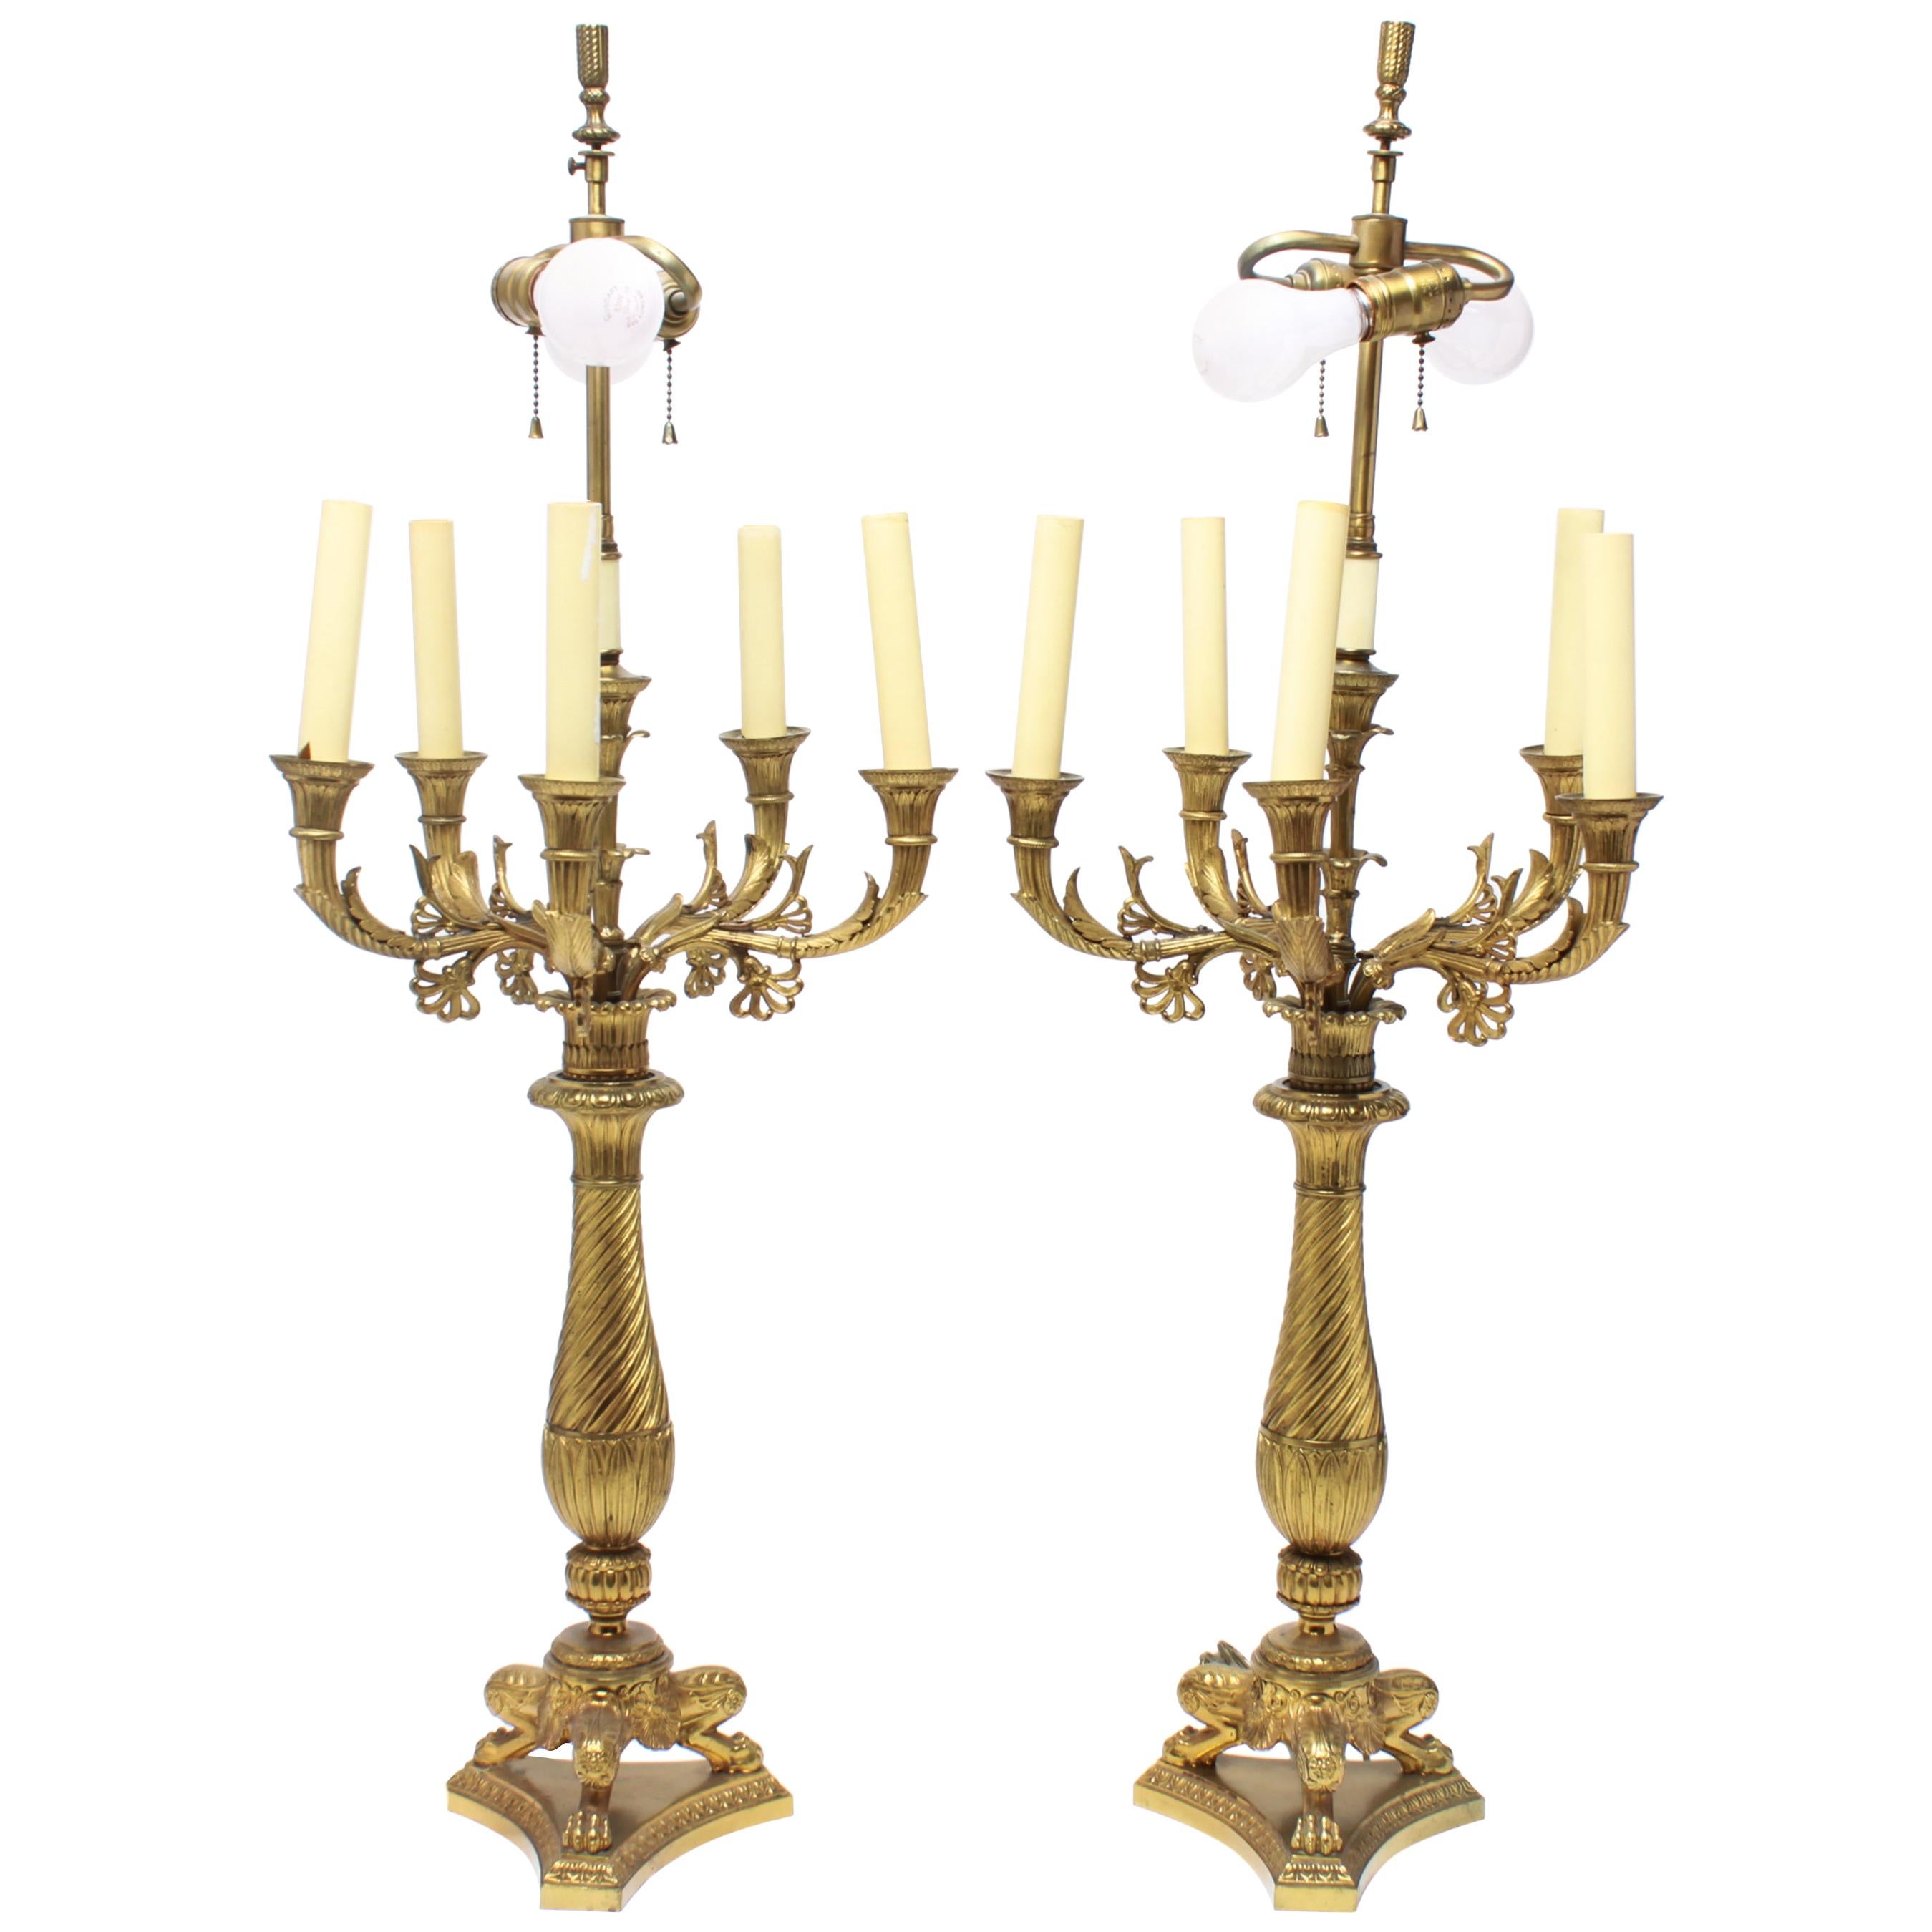 Neoclassical Candelabra Table Lamps in Gilt Bronze